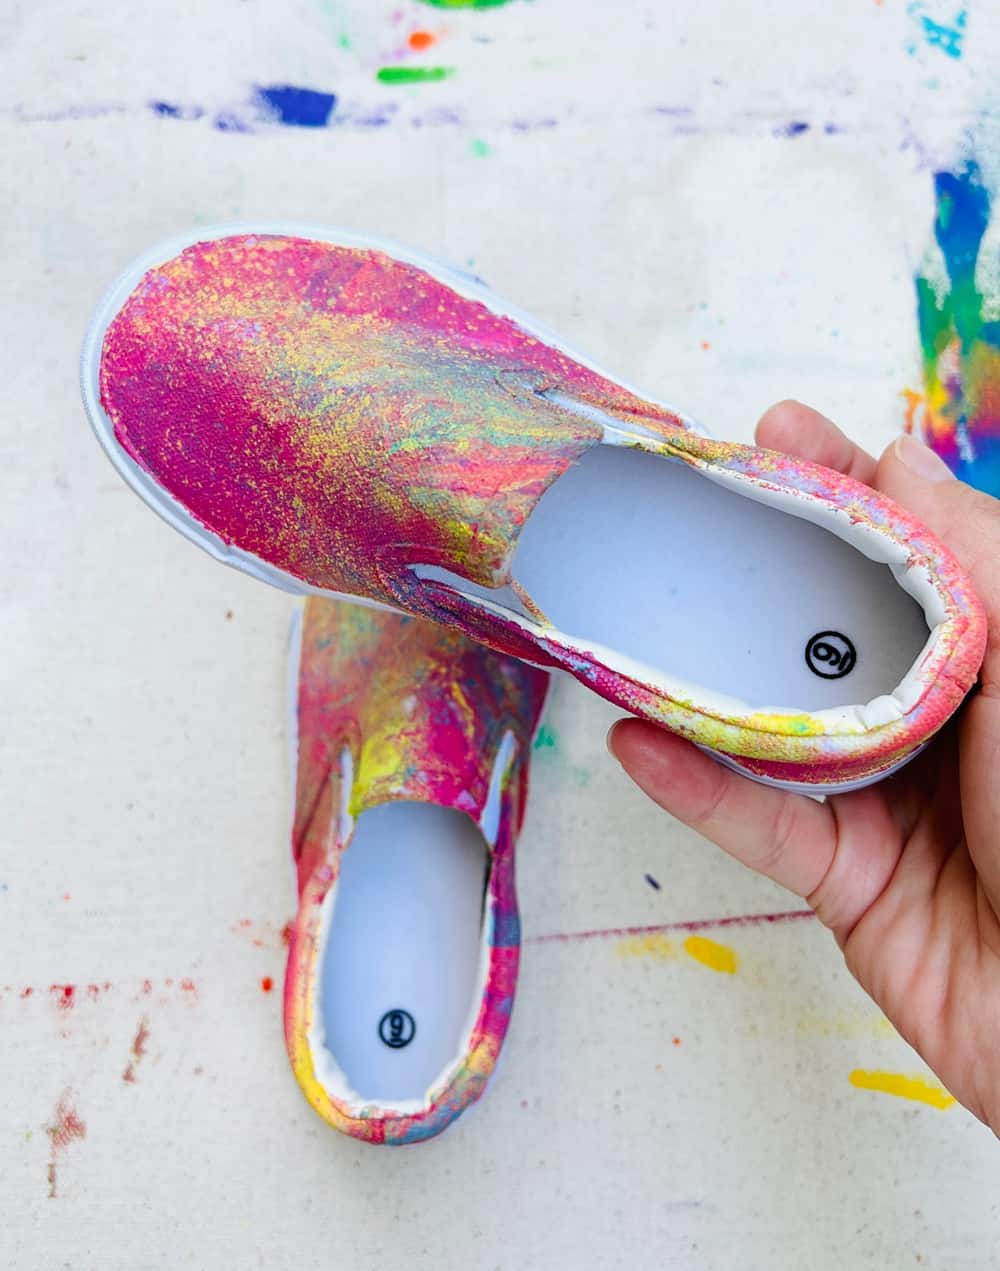 hydro dipping shoes